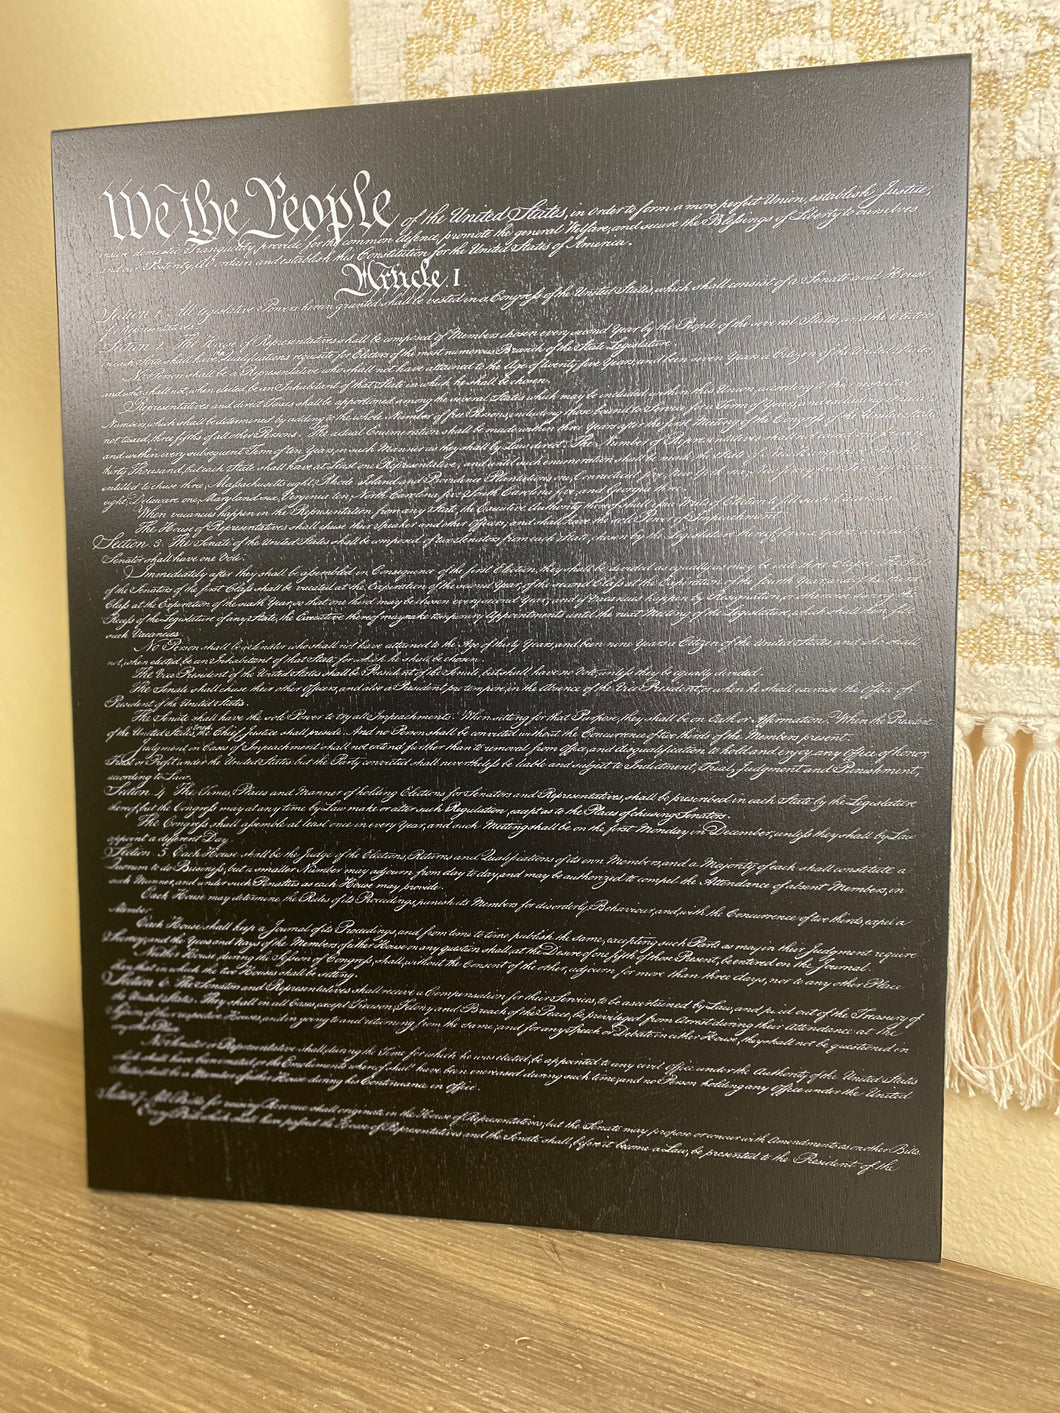 The Constitution of the United States of America printed on wood.